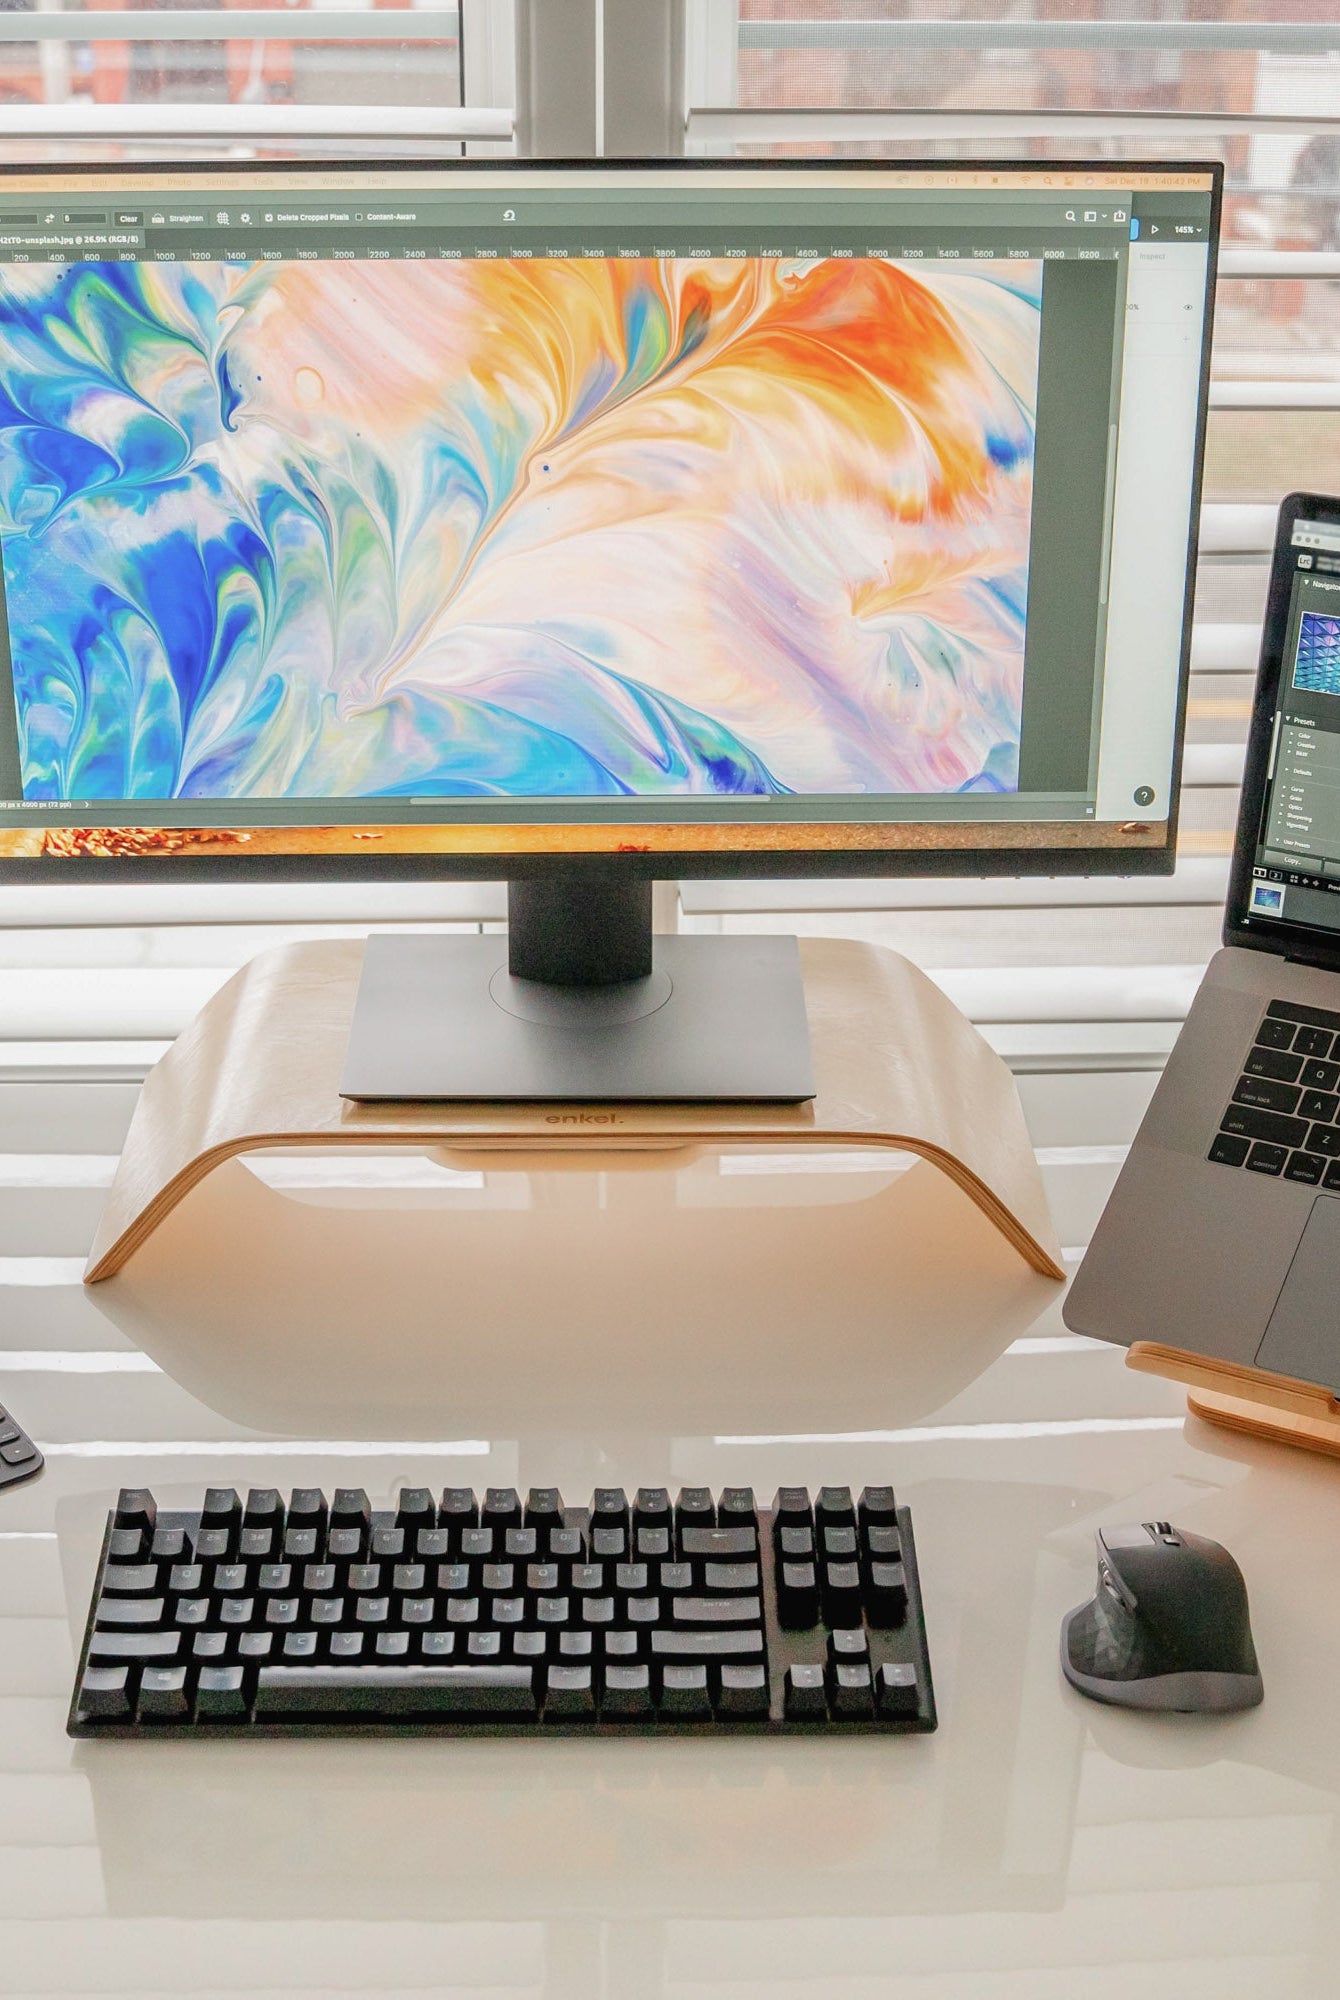 Enkel Studios Birch Wood Work Smarter Set - Monitor and Laptop Stand from Active Goods Canada